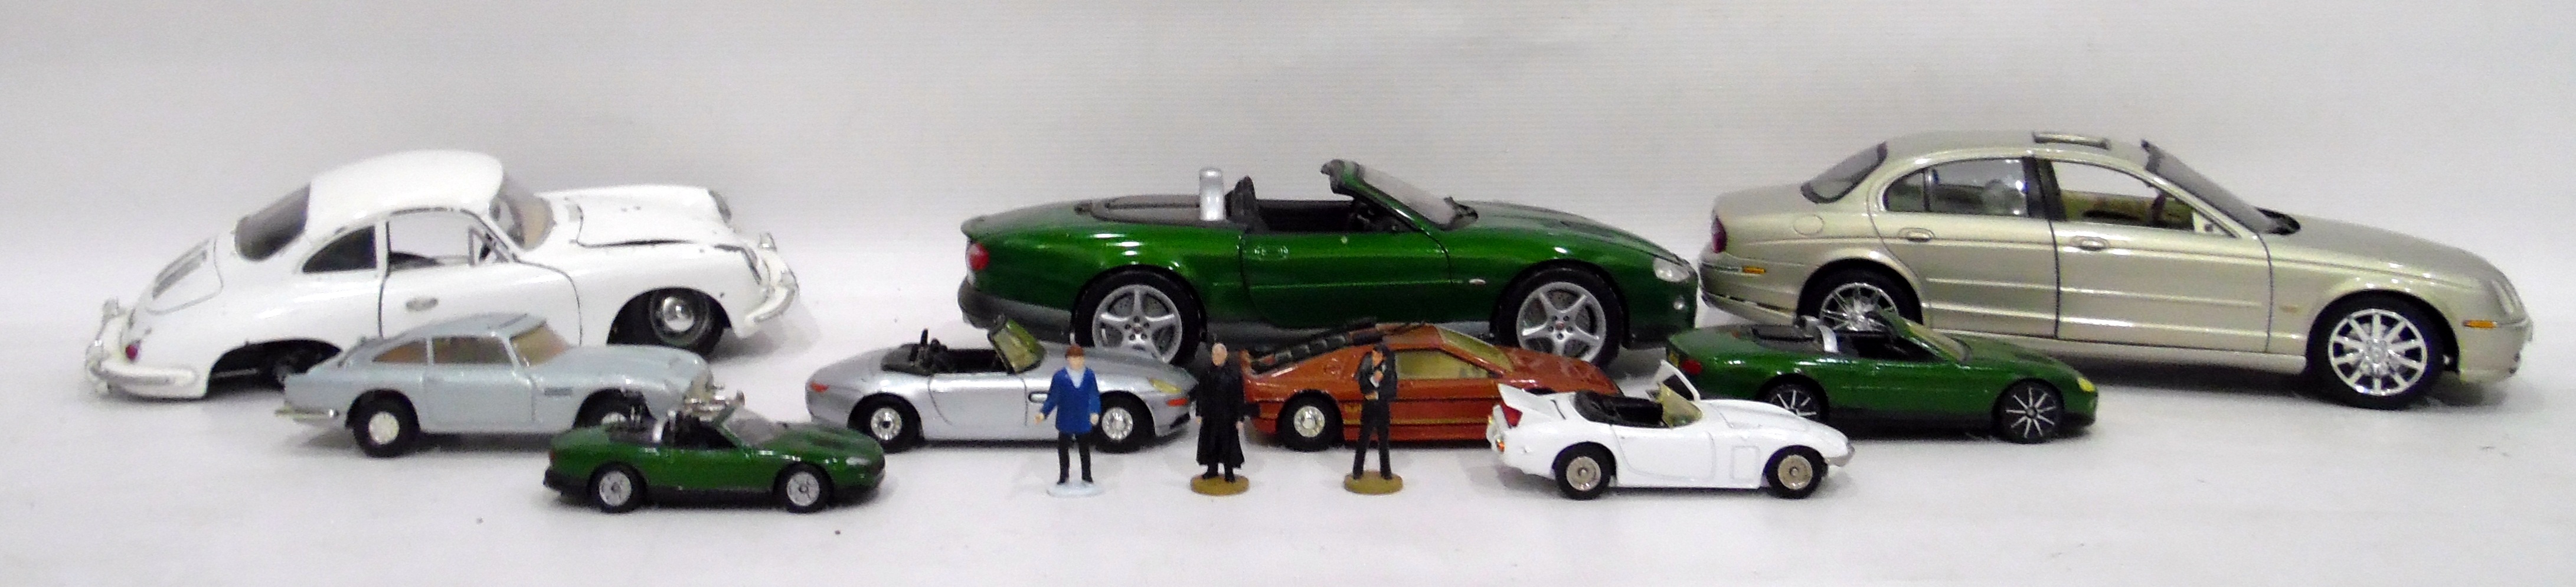 Quantity of James Bond cars including Aston Martin DB5, Jaguar XKR in two sizes, - Image 2 of 2